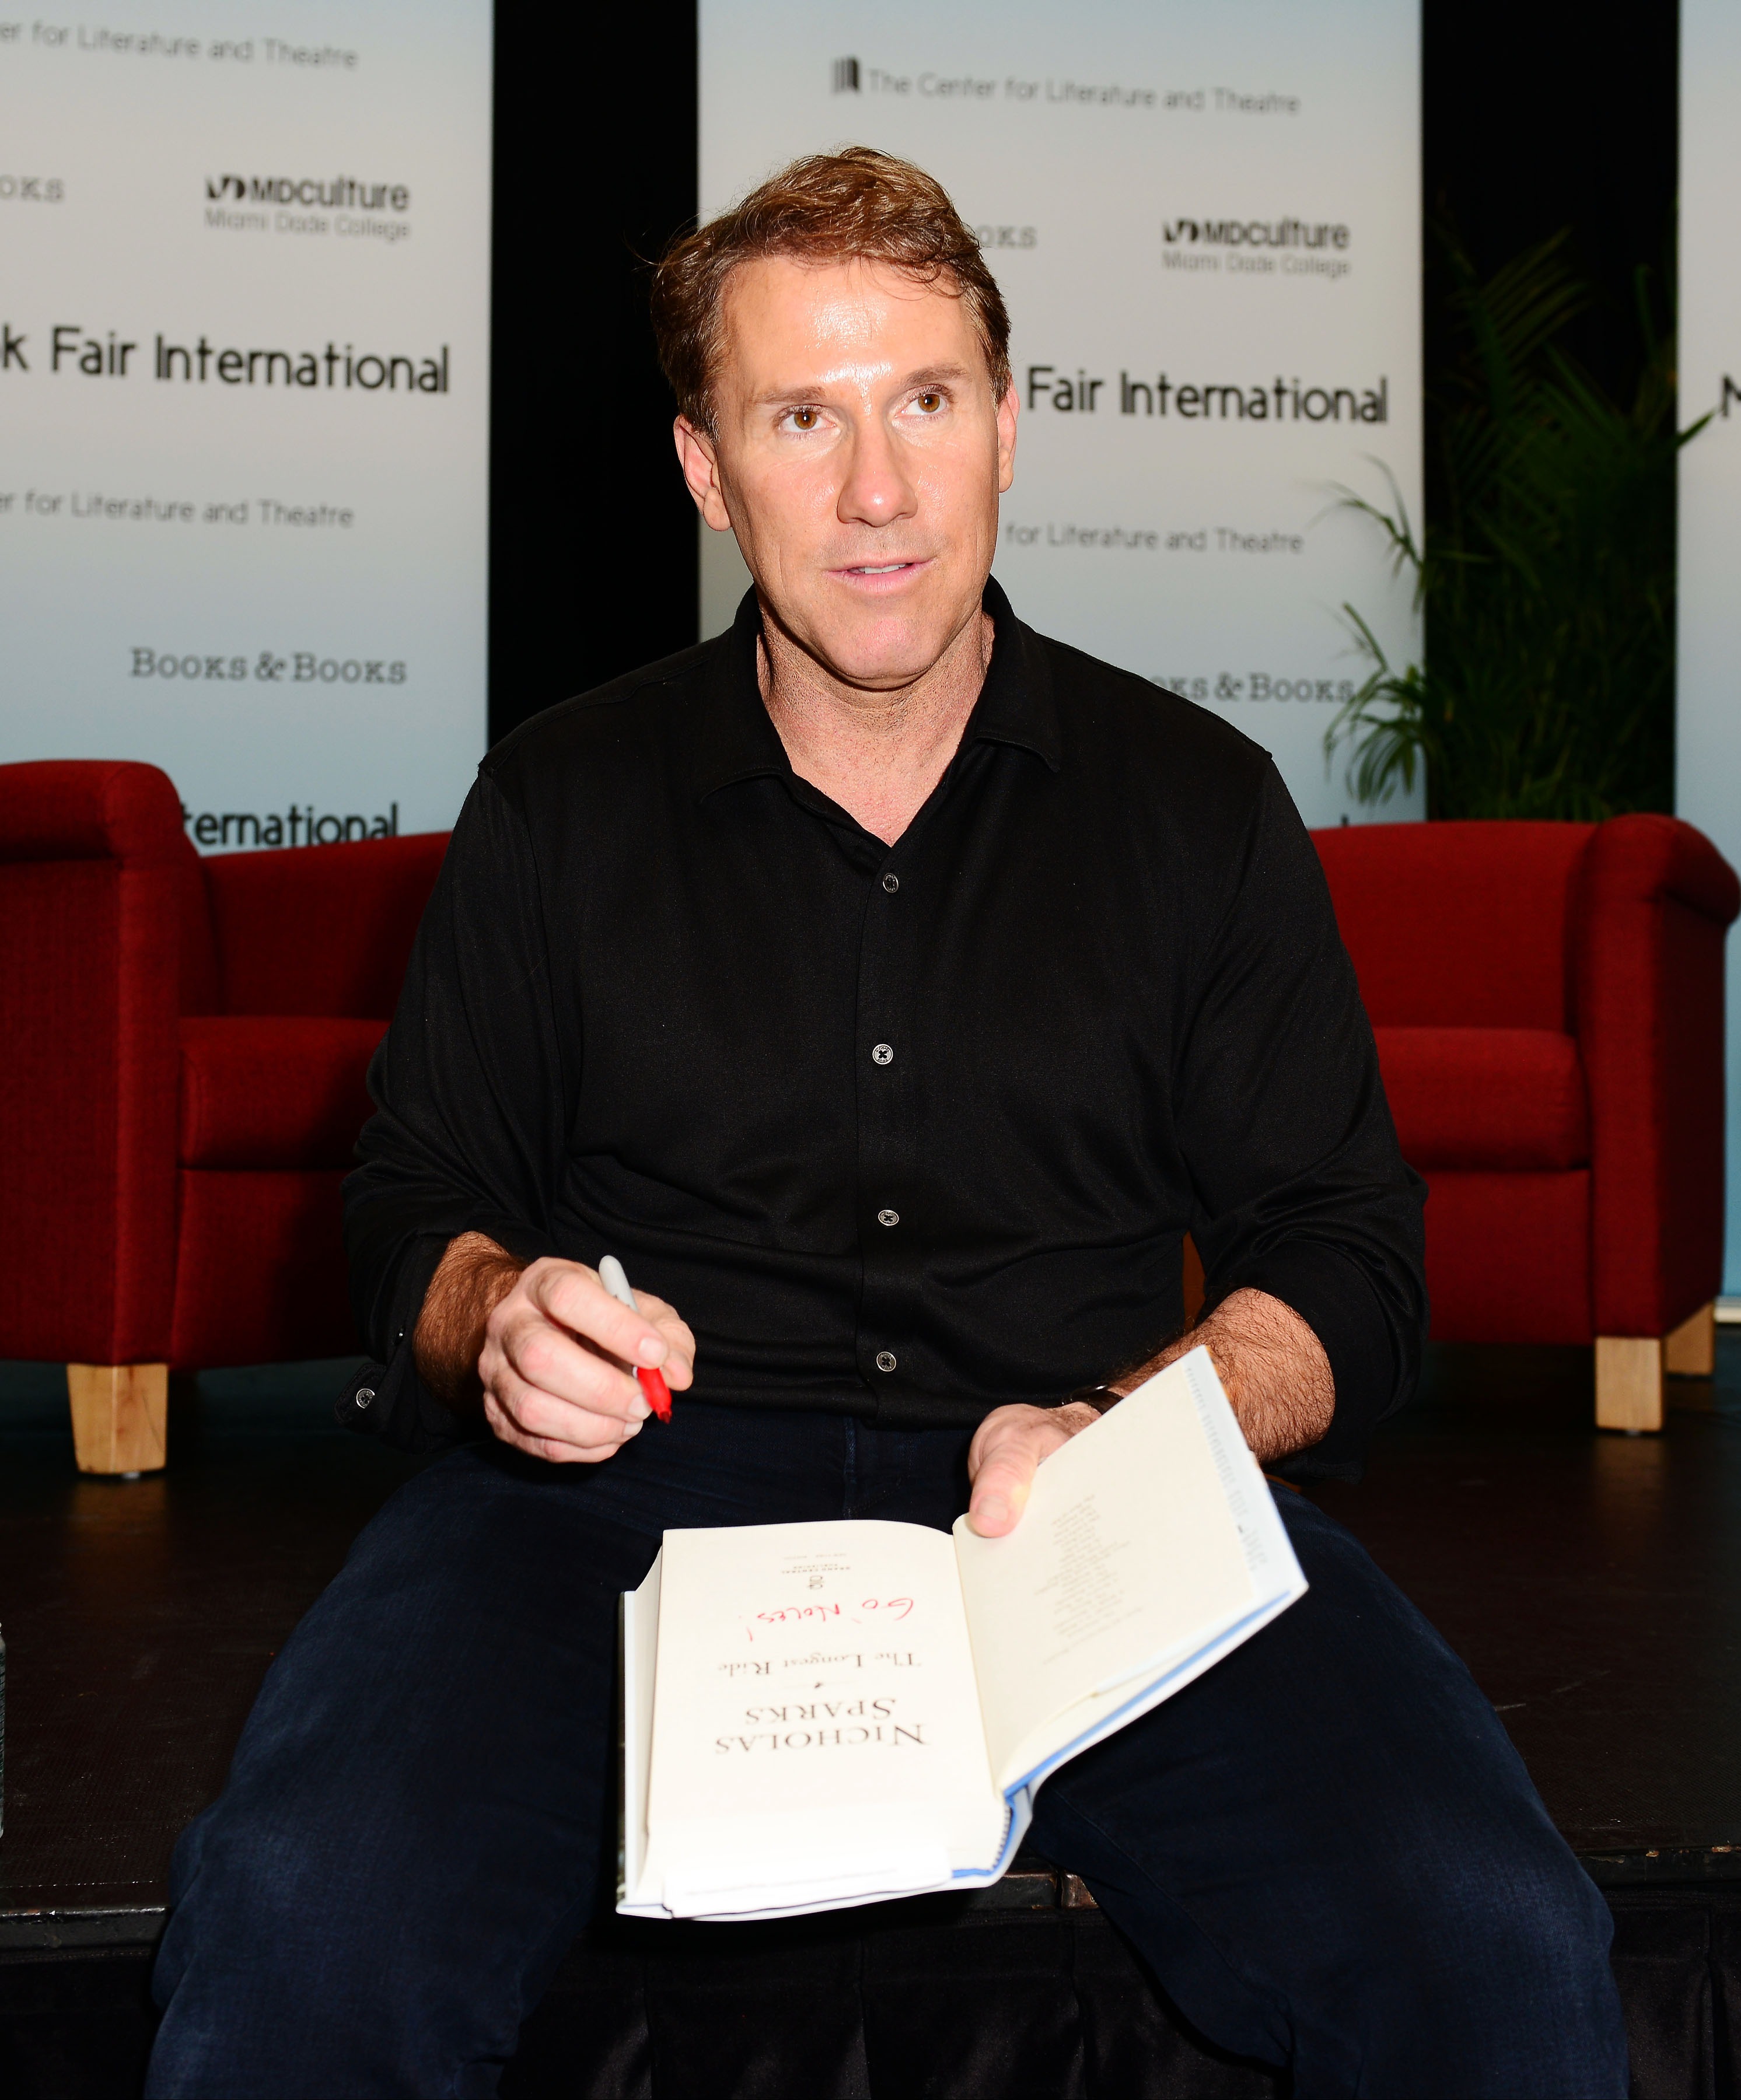 Author Nicholas Sparks discusses his book "The Longest Ride" presented by Books and Books at Chapman Conference Center at Miami Dade College on Sept. 30, 2013 in Miami. (Vallery Jean—Getty Images)